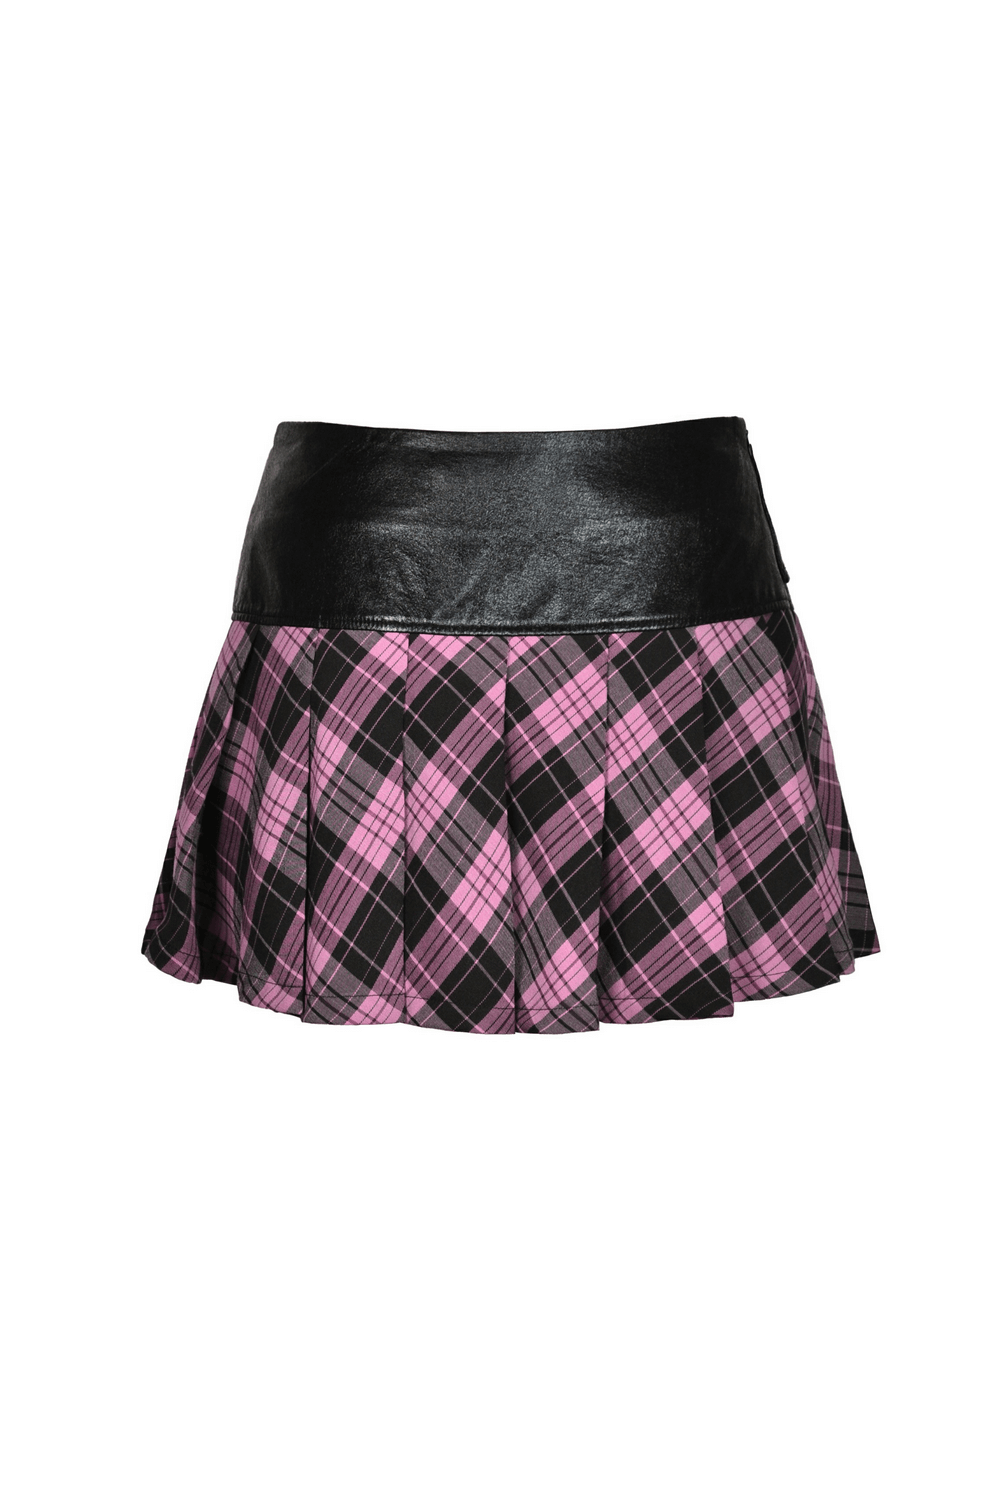 Pink and Black Plaid Mini Skirt with Edgy Leather Belt